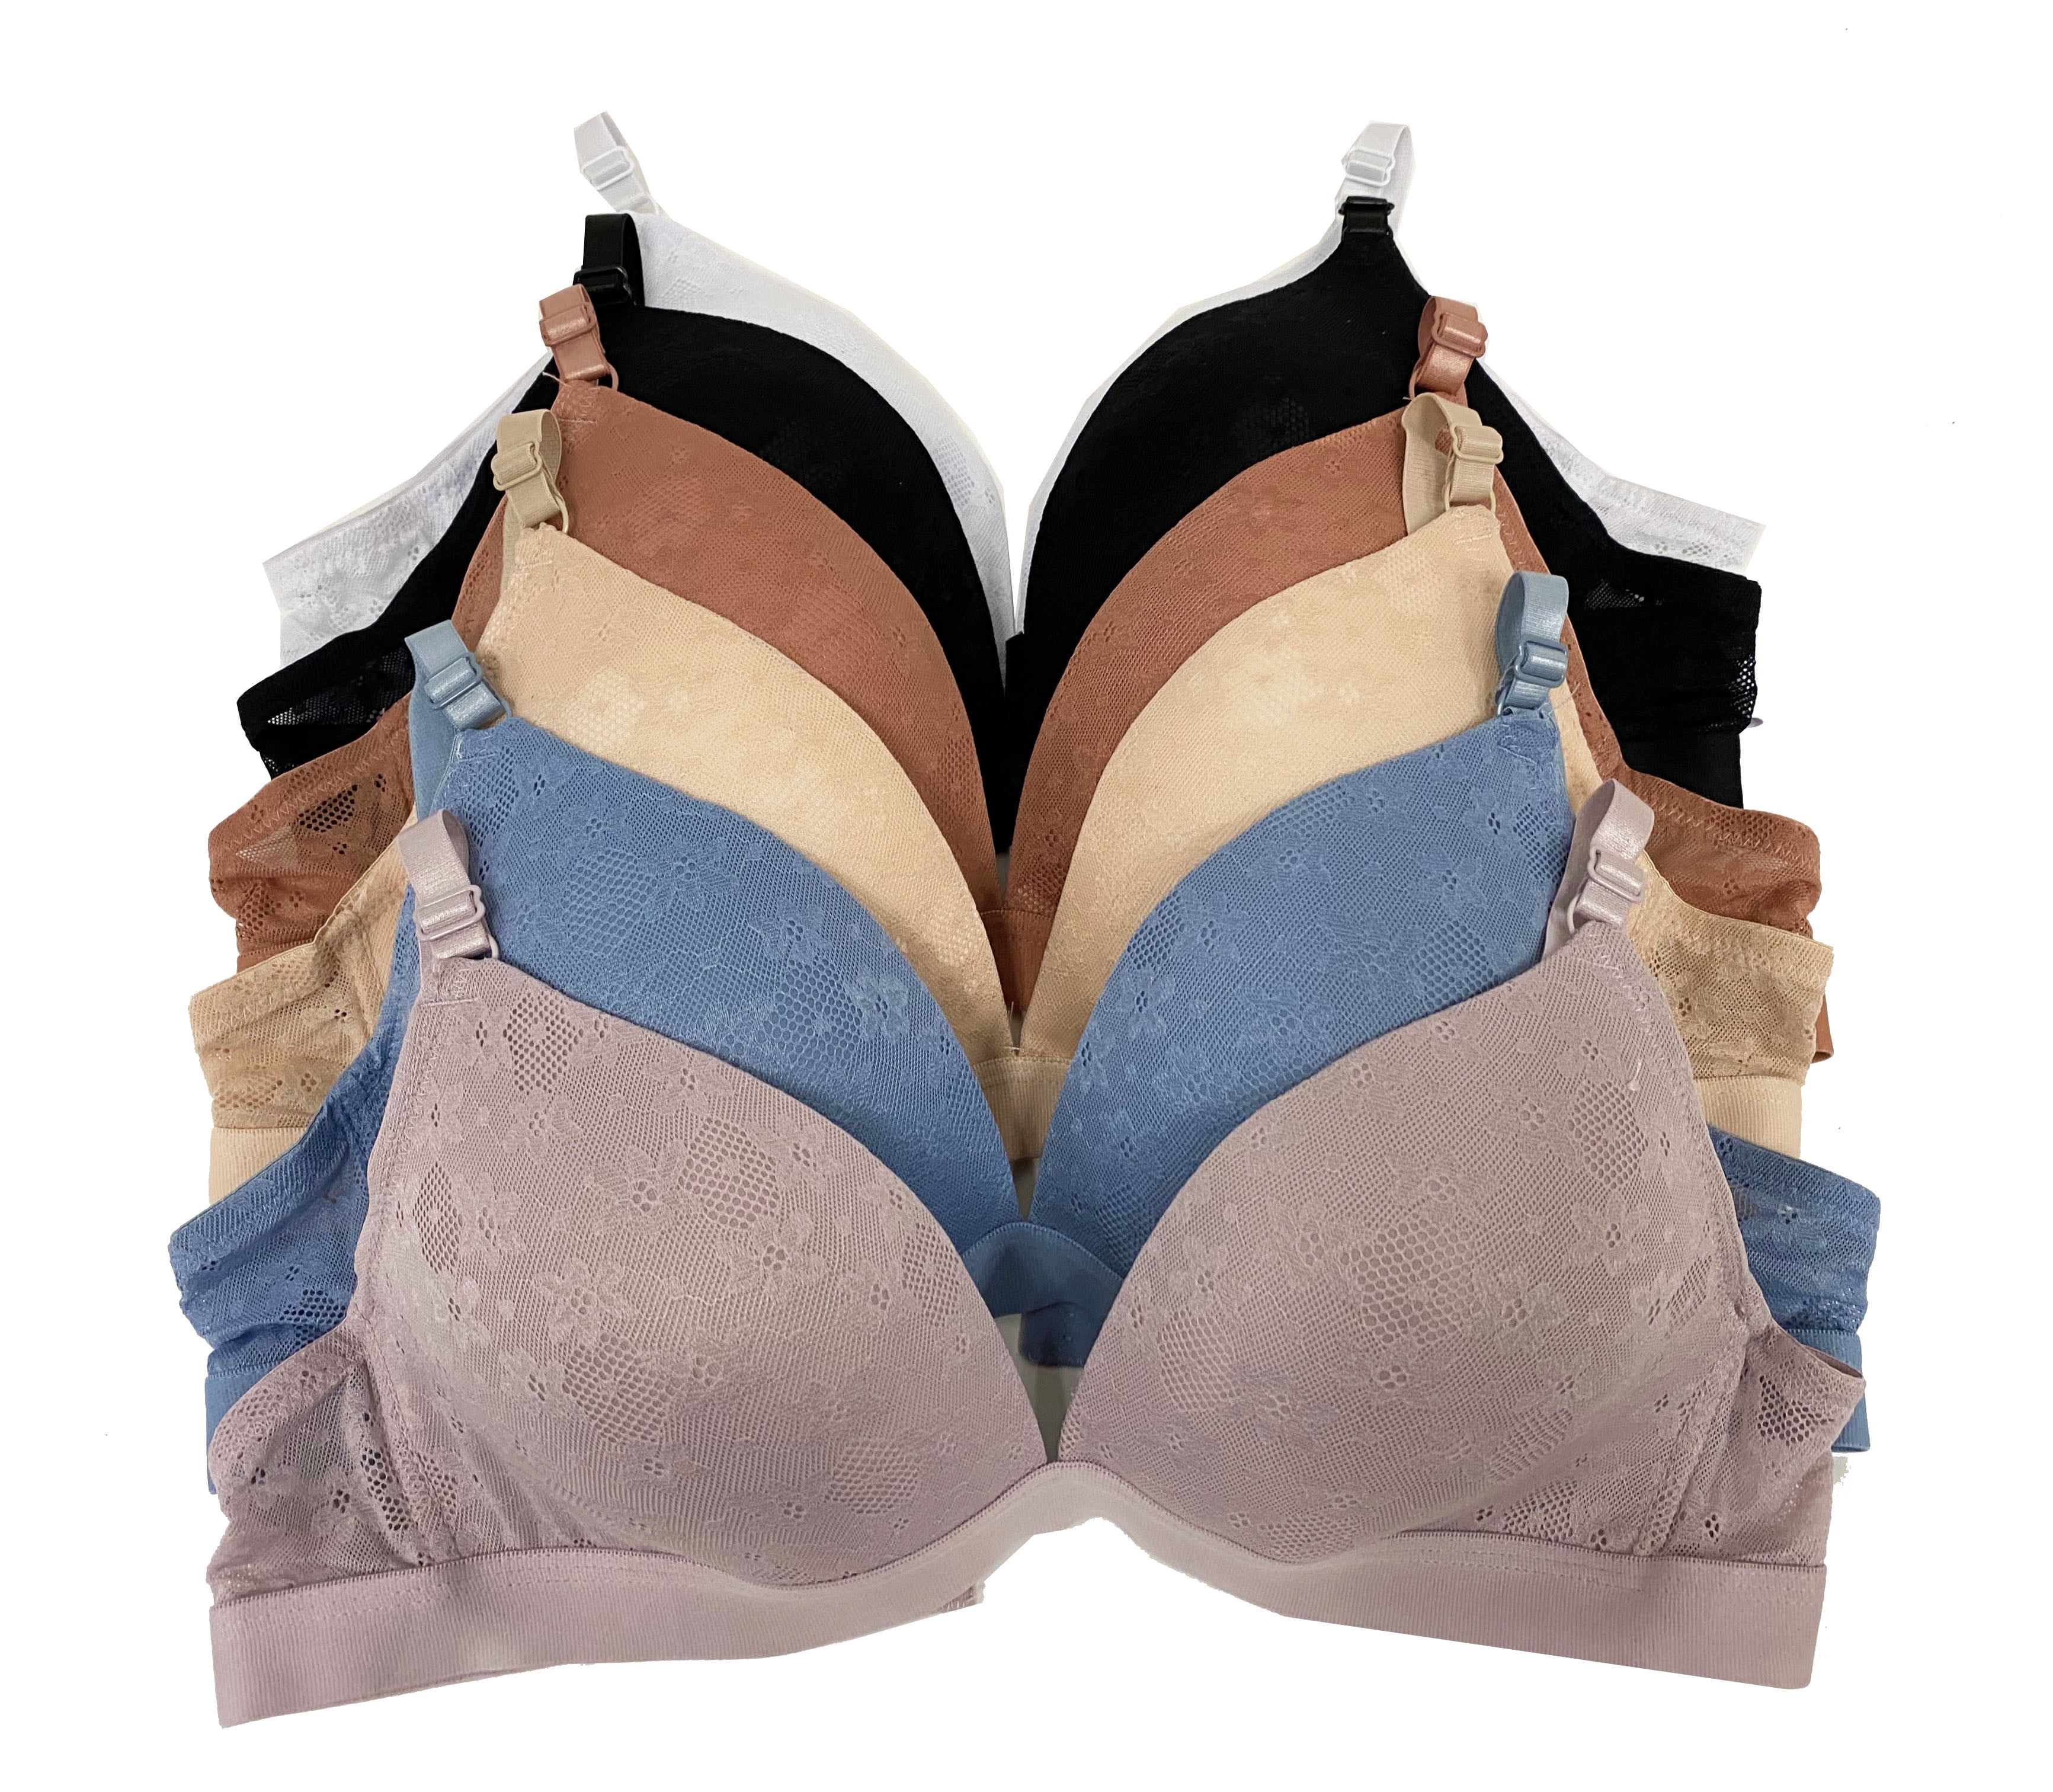 Women Bras 6 pack of Basic No Wire Free Wireless Bra B cup C cup Size 38C  (S6319) 